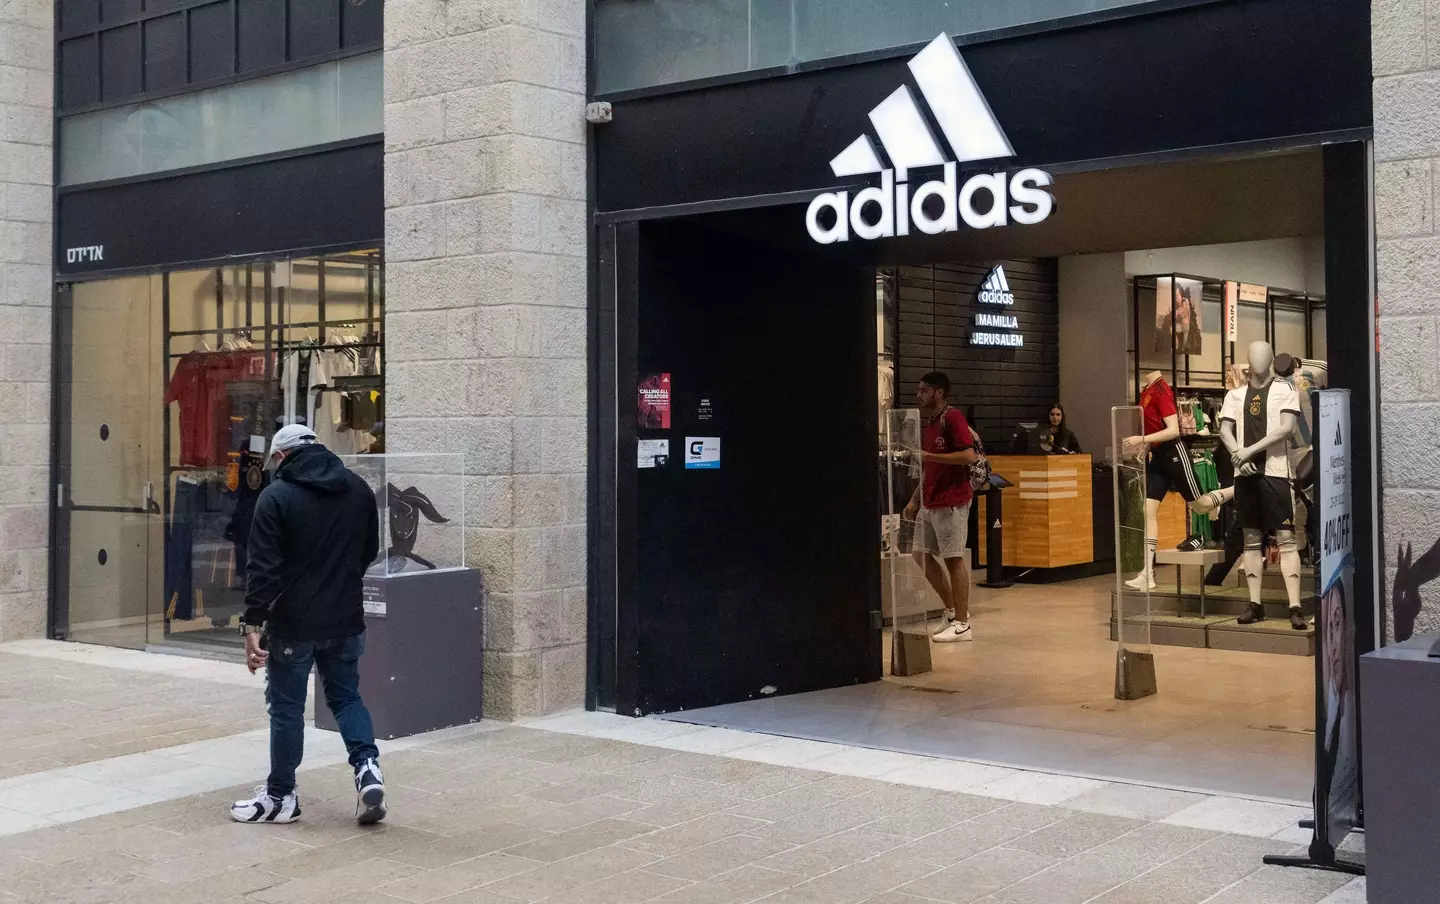 Times are tough for Adidas.